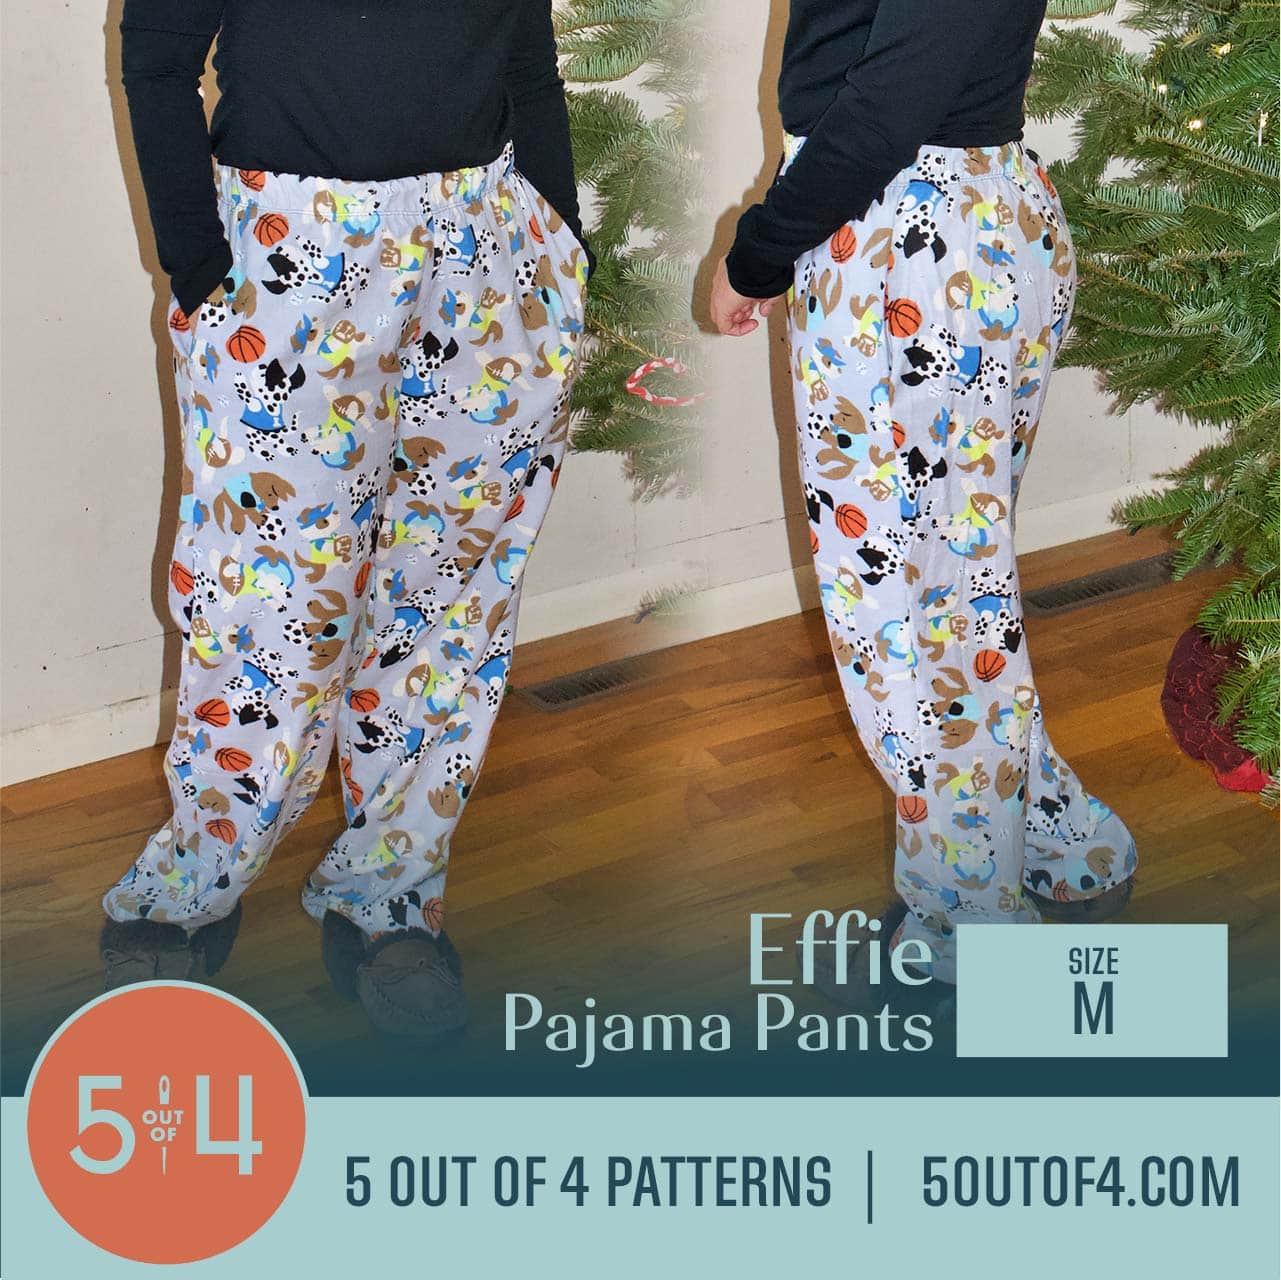 Effie Woven Pajama Pants - 5 out of 4 Patterns